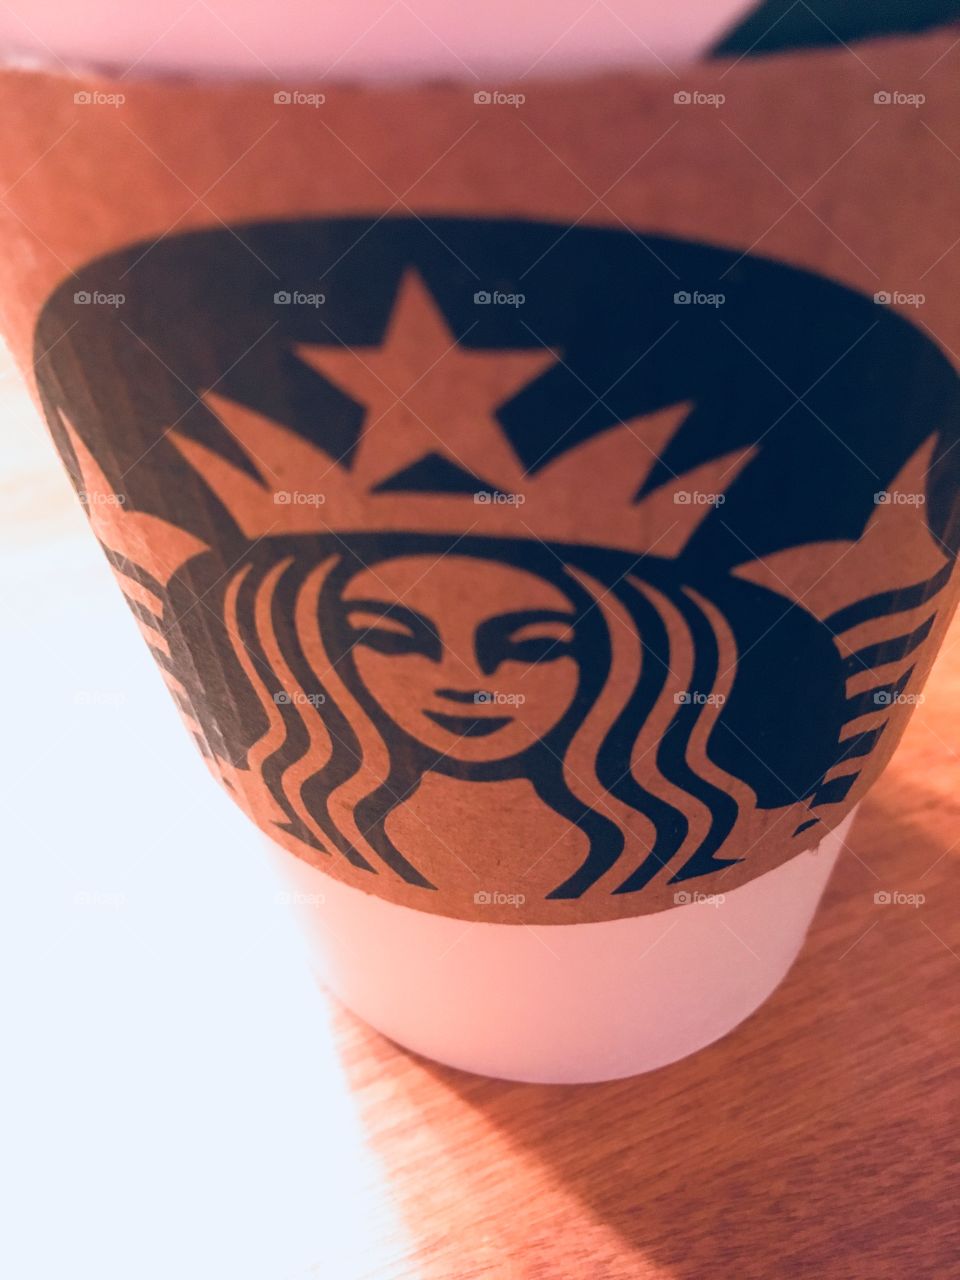 Starbucks coffee cup on wooden table in morning light. 